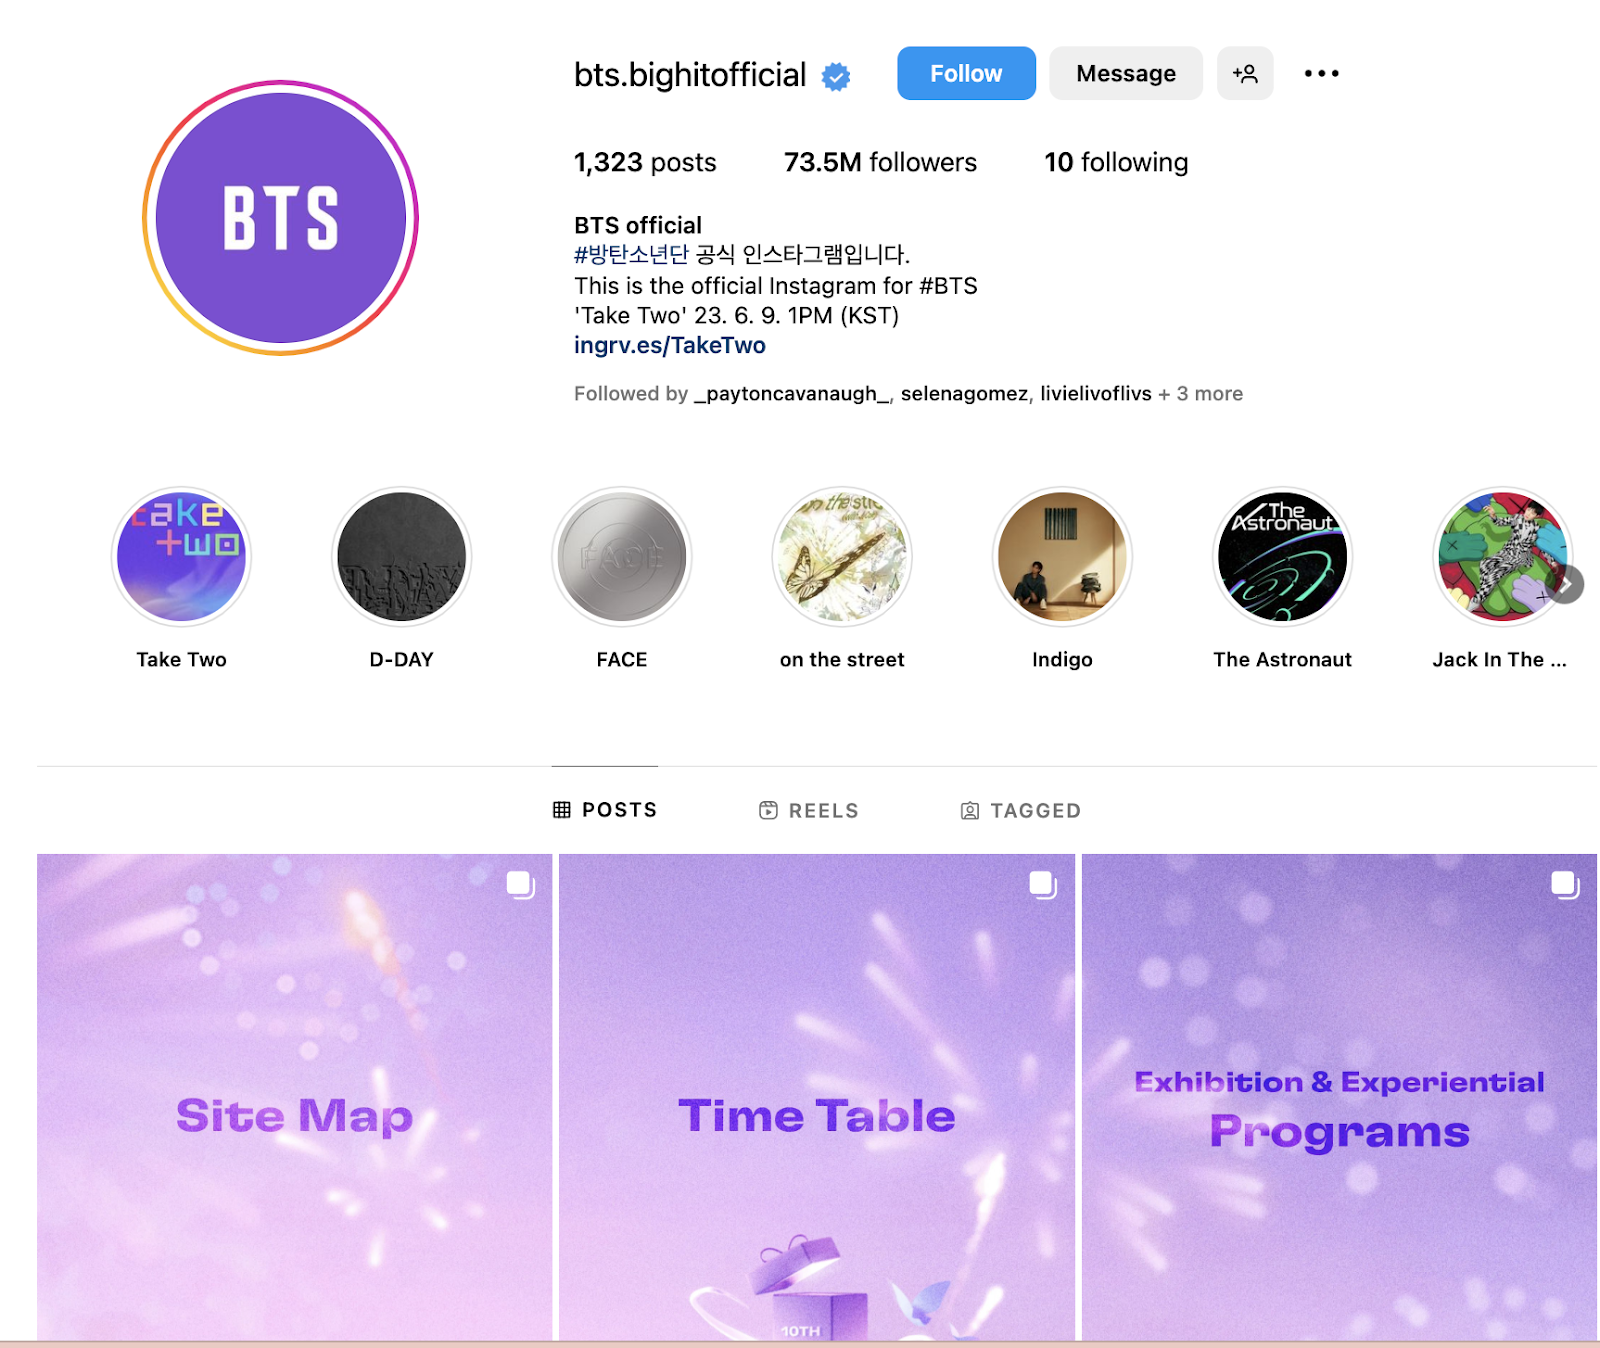 What Does BTS Mean On Instagram?